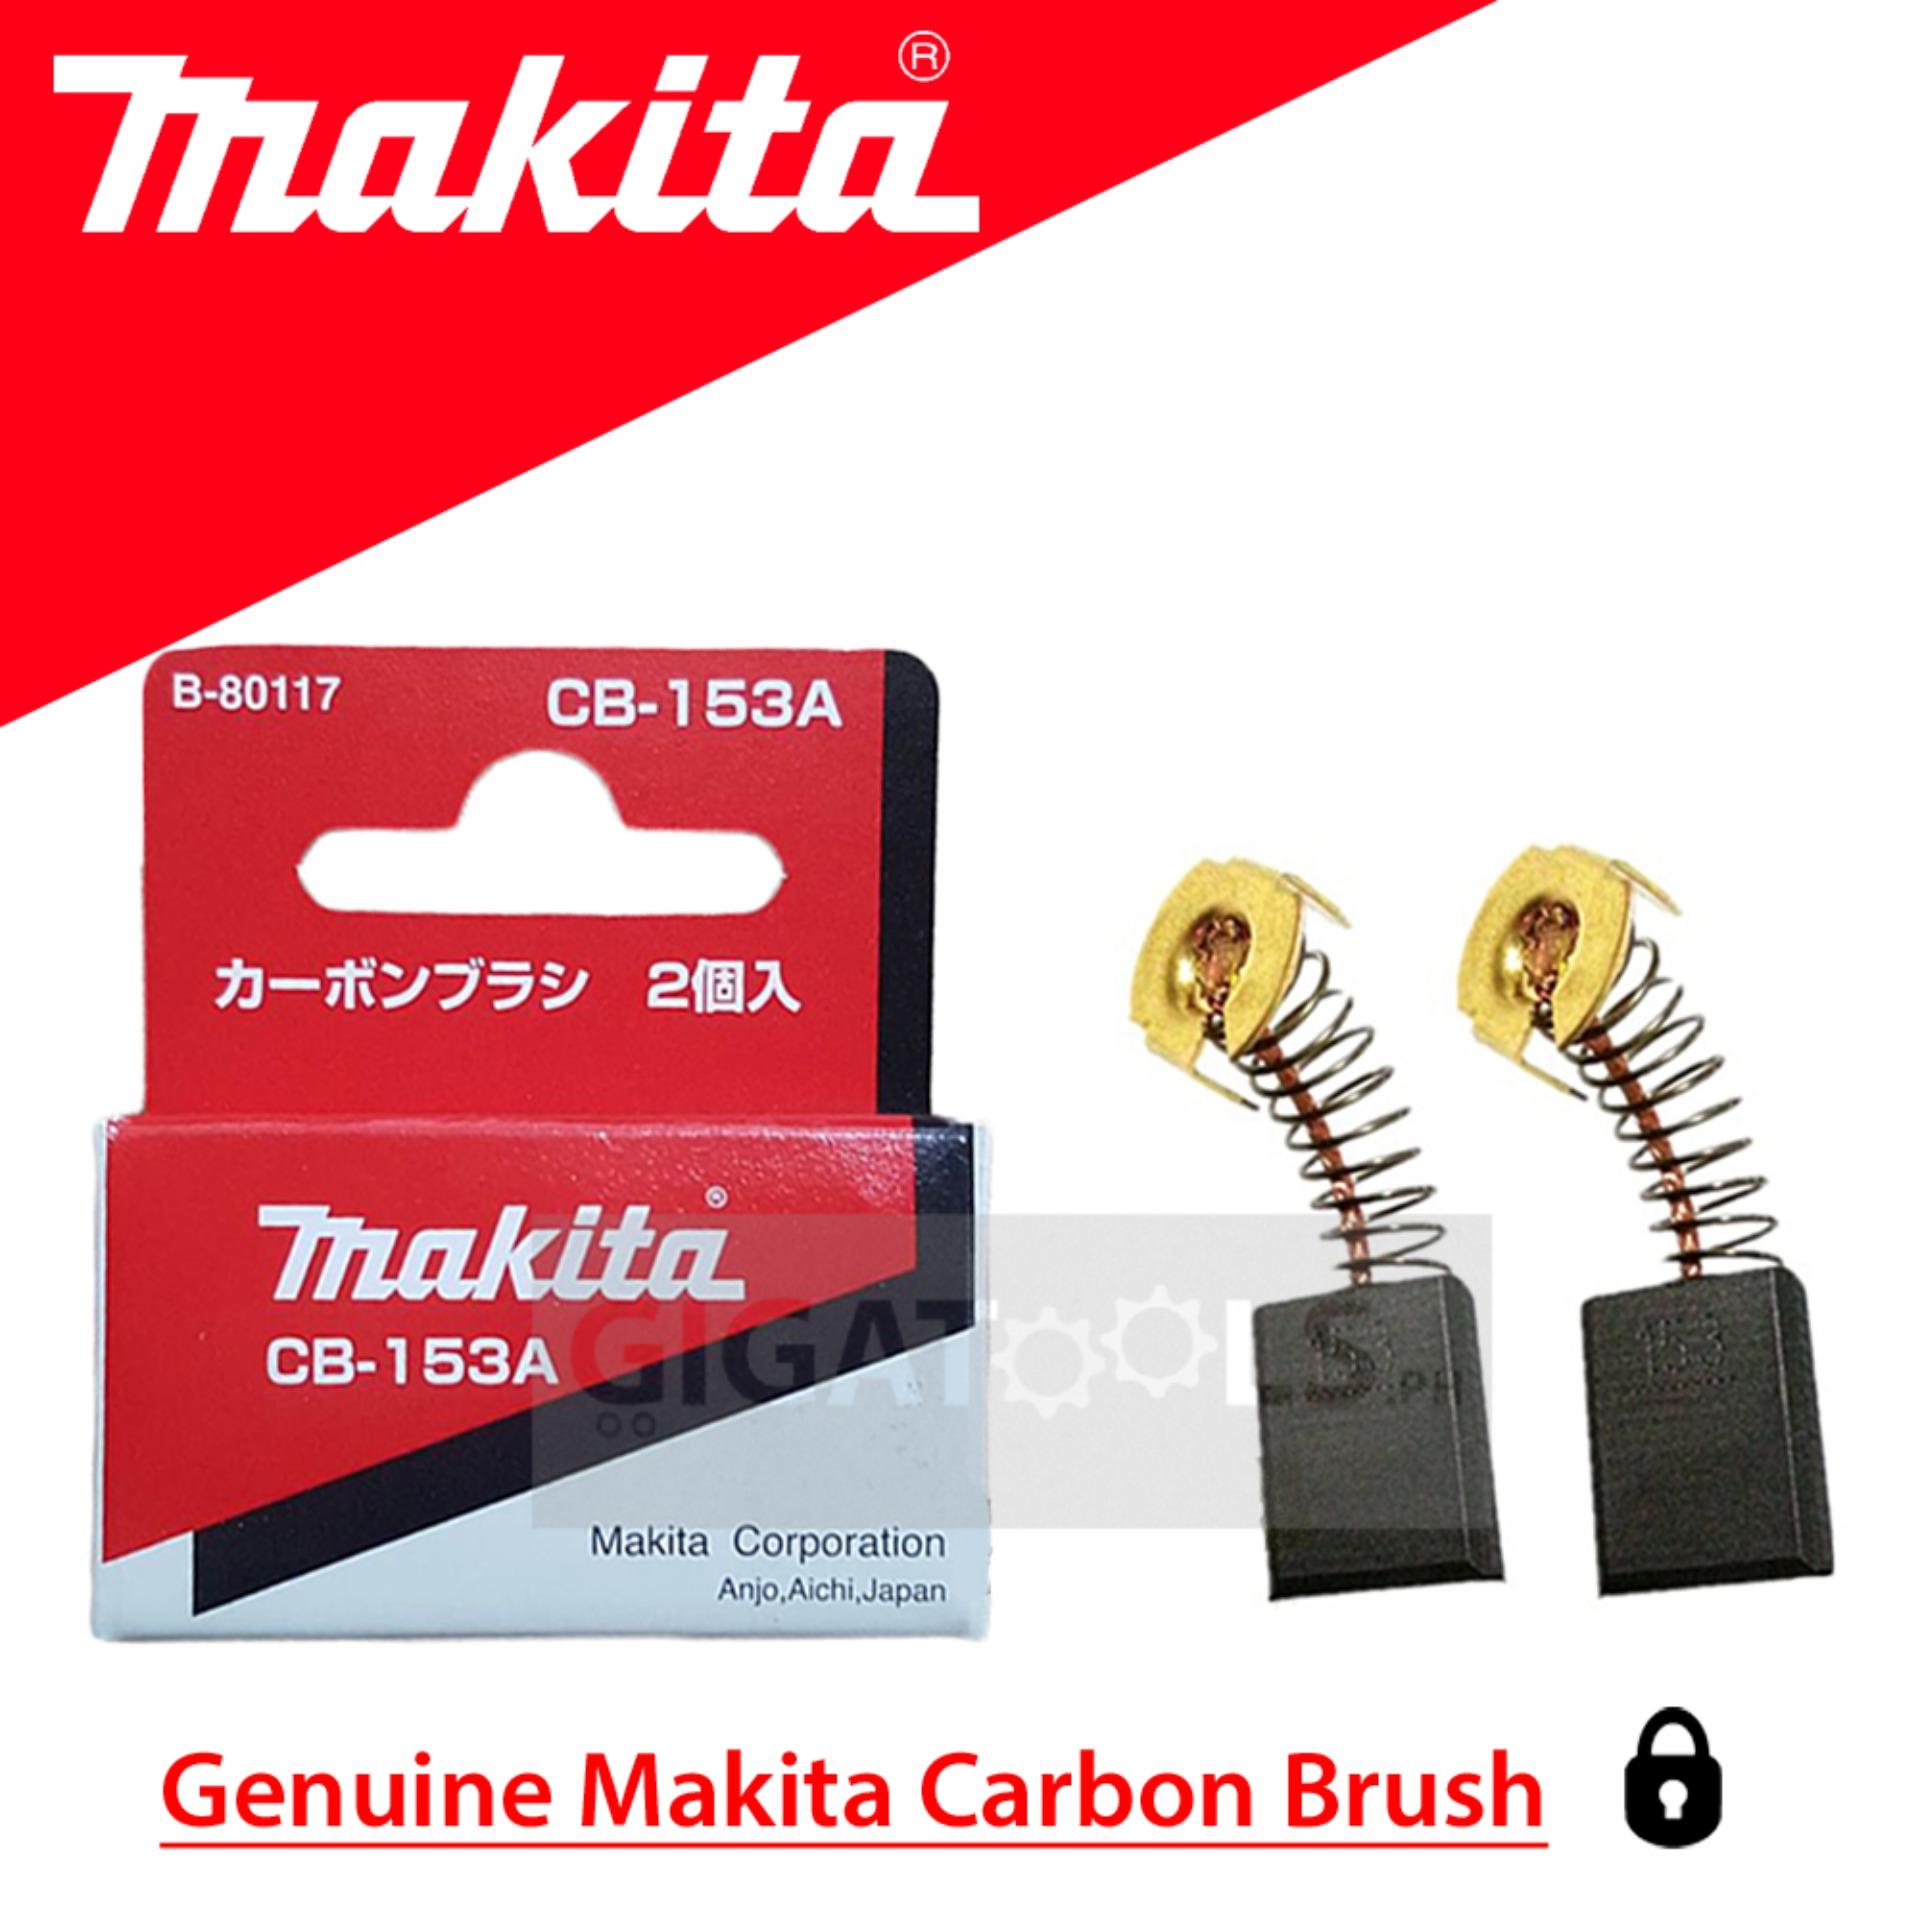 CB-153A Japanese Makita Carbon Brushes Set replaces